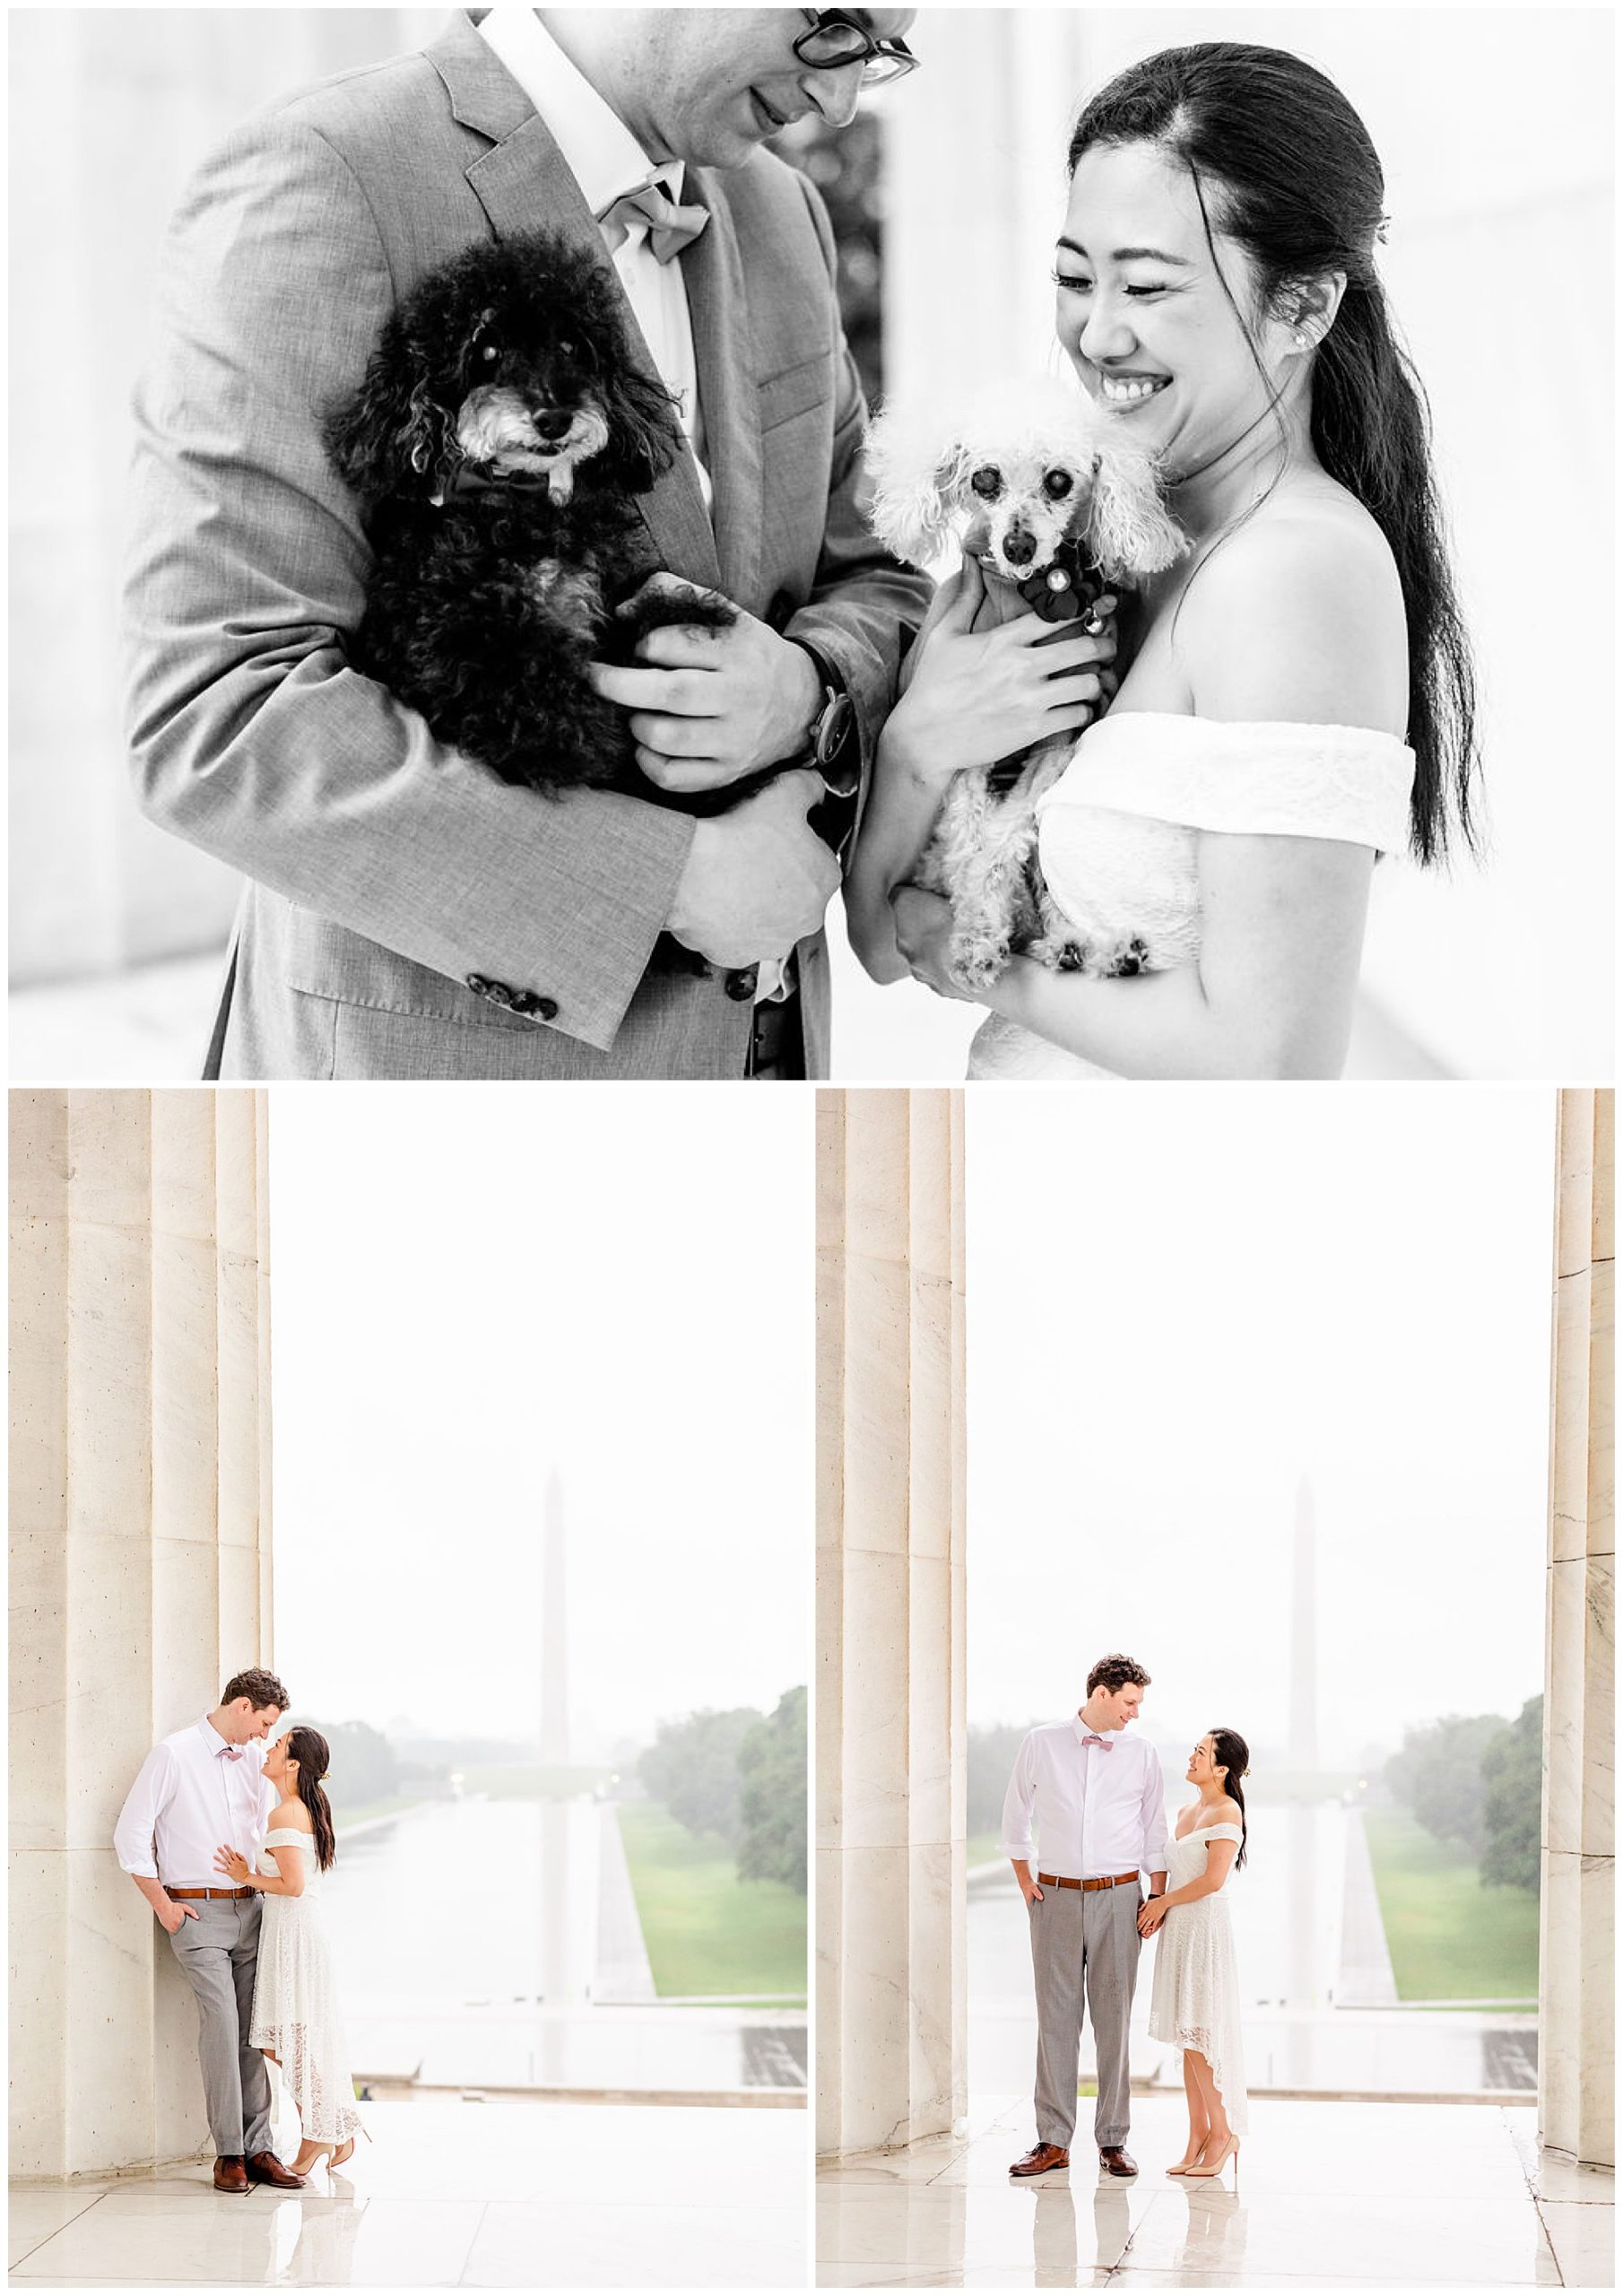 sunrise and sunset DC wedding, DC wedding photos, DC wedding portraits, micro-wedding, DC micro-wedding photography, DC micro-wedding photographer, DC petite wedding photographer, northern Virginia wedding photography, natural light wedding photography, unique wedding, Rachel E.H. Photography, black and white, couple holding dogs, couple almost kissing, couple leaning against marble pillar, hair and makeup by Carolyn Thombs Artistry